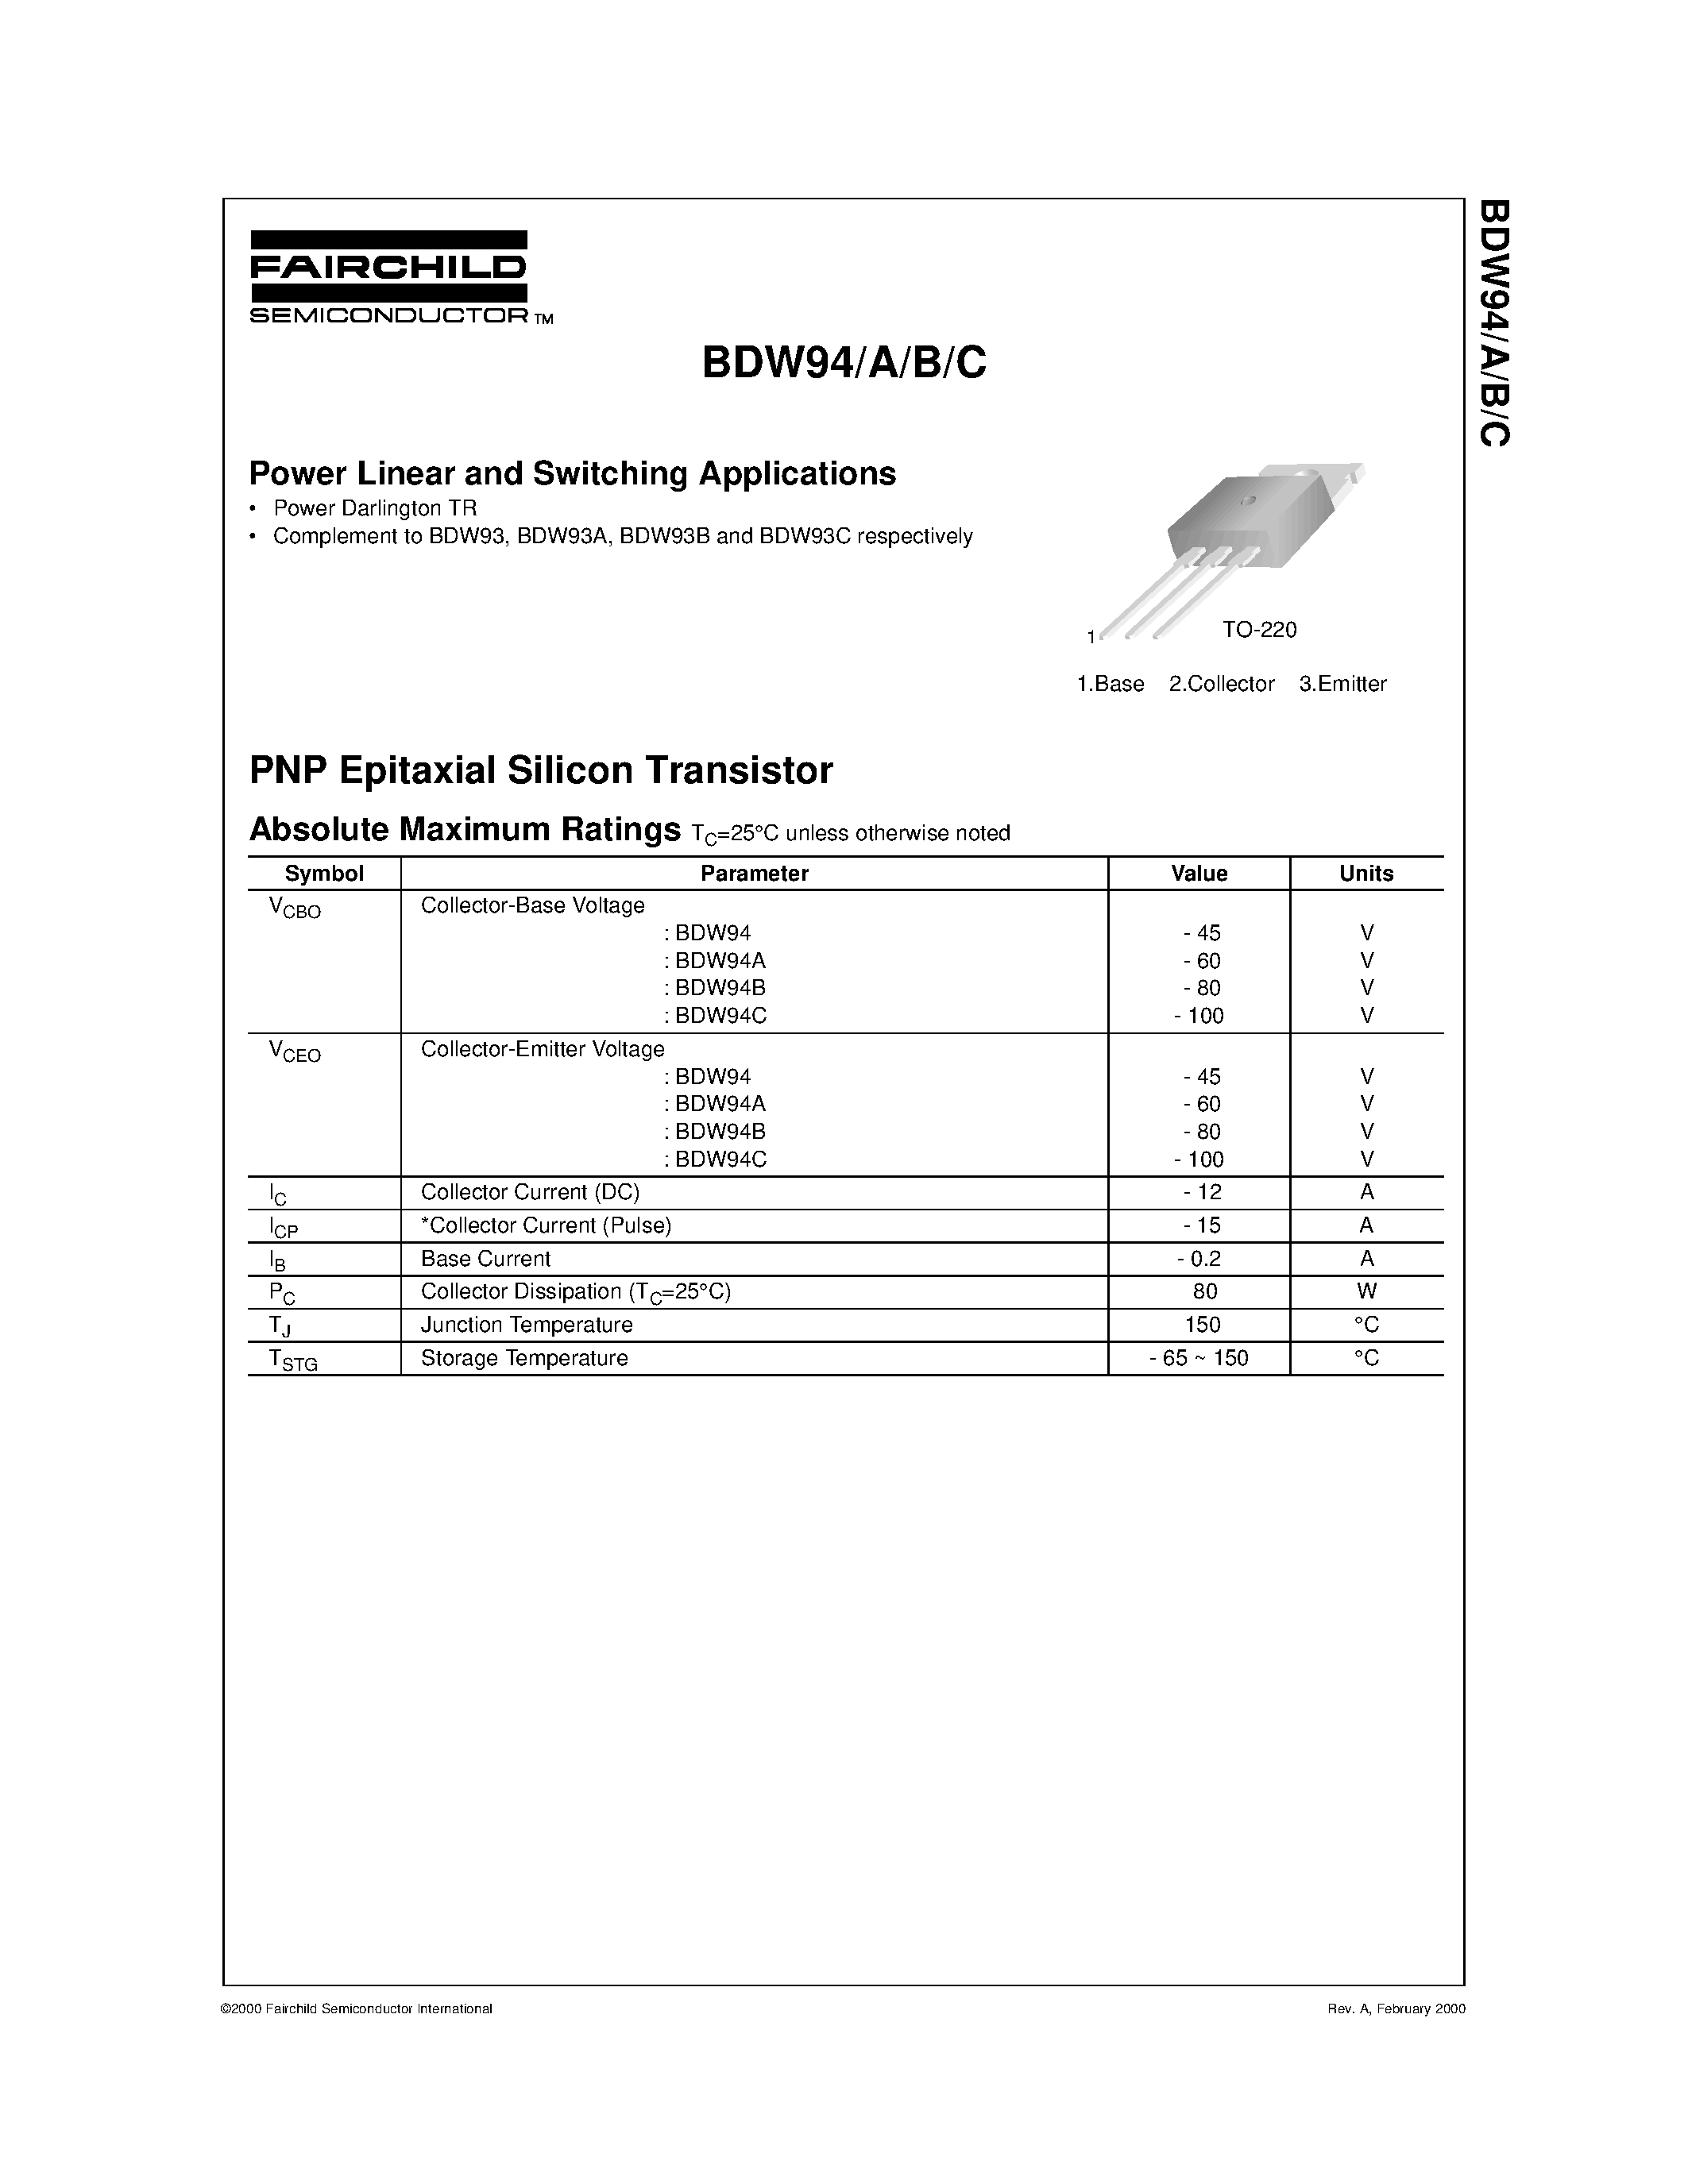 Datasheet BDW94C - Power Linear and Switching Applications page 1